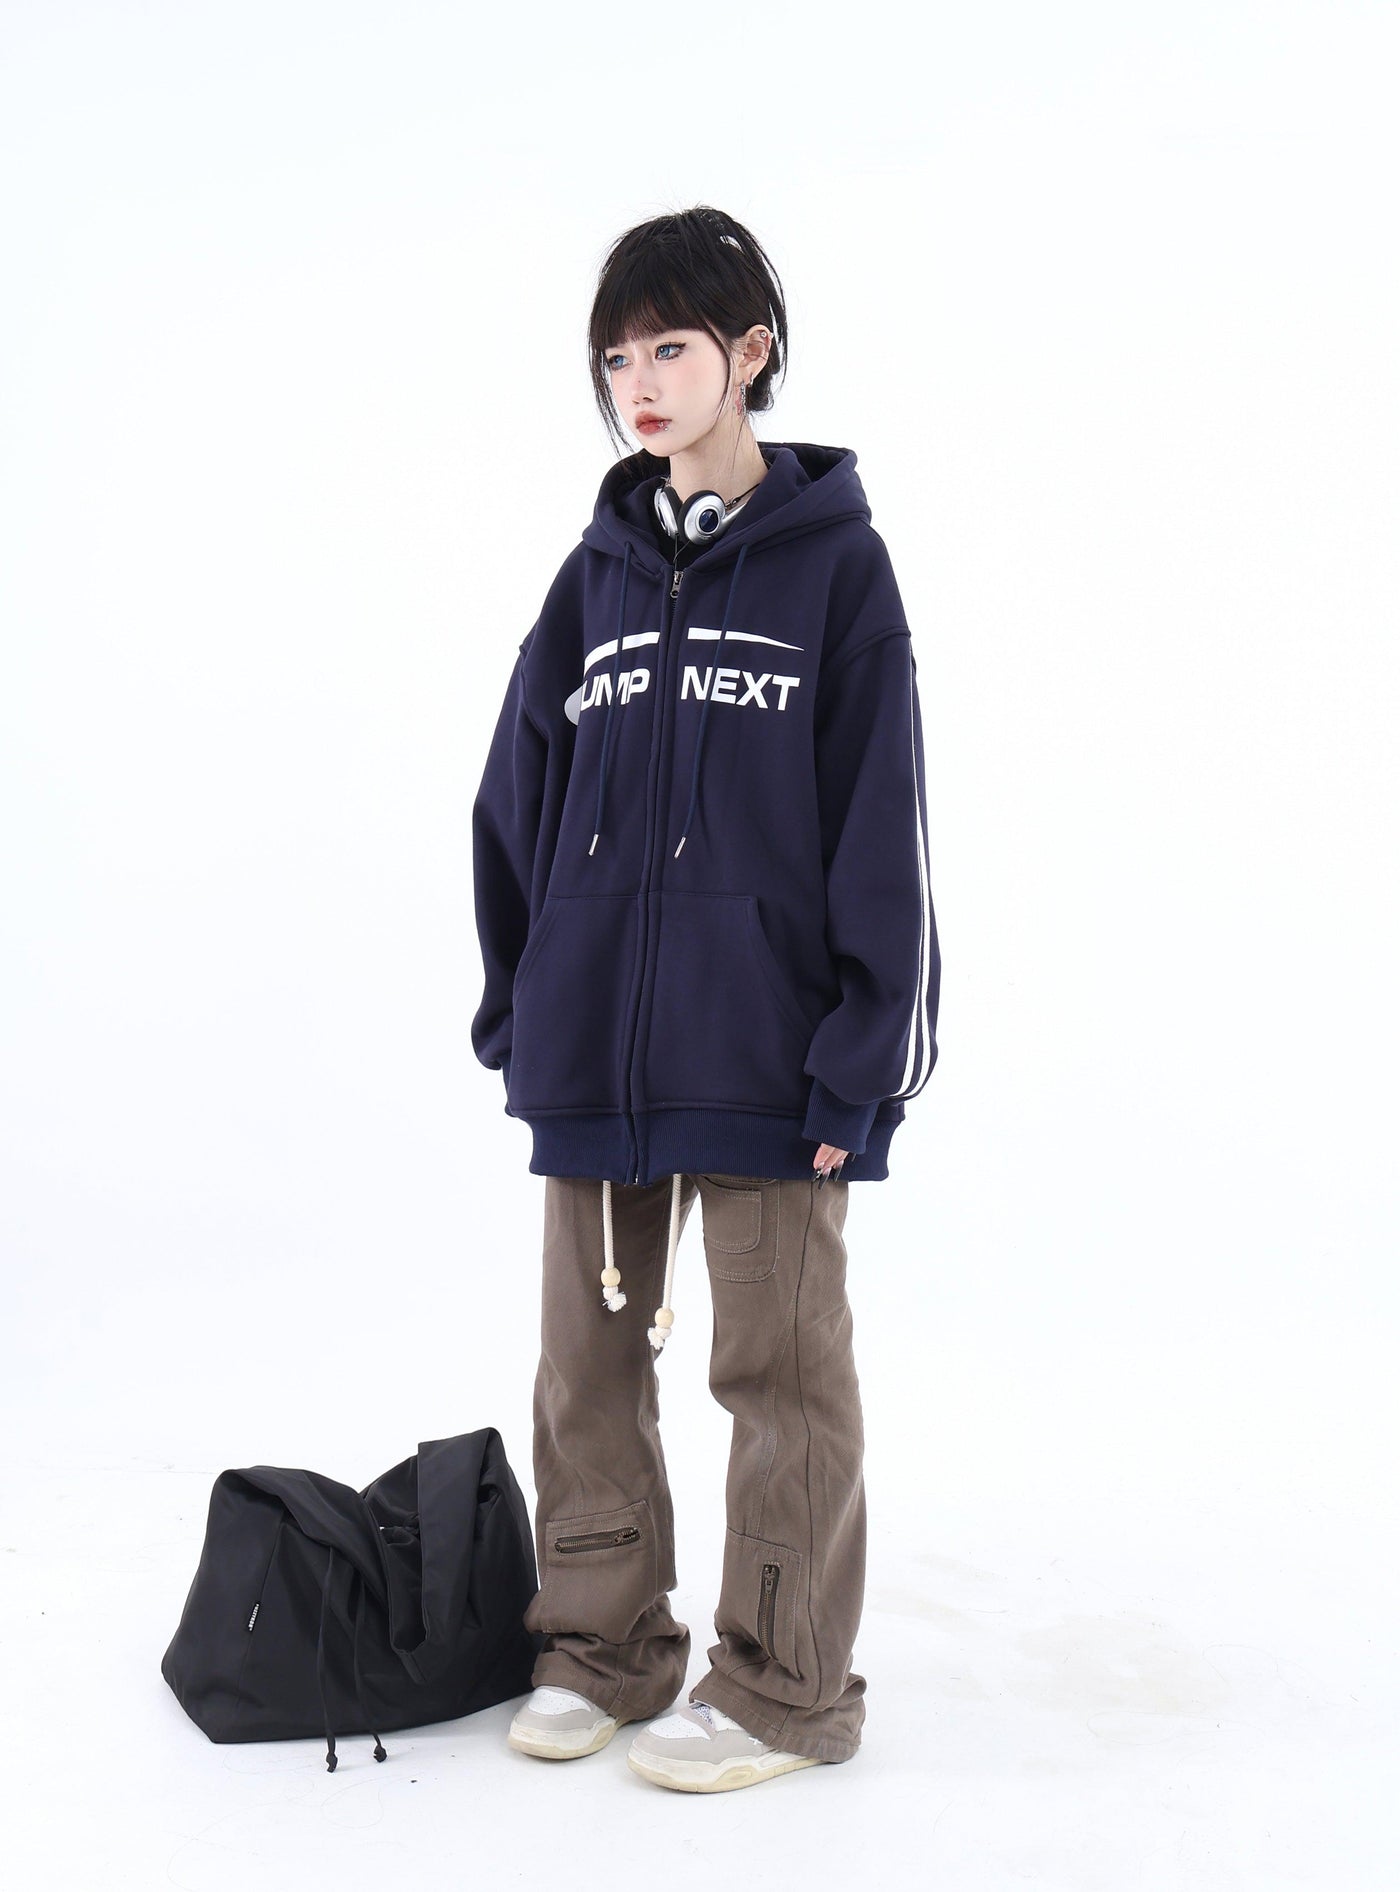 Casual Logo Zipped Hoodie Korean Street Fashion Hoodie By Jump Next Shop Online at OH Vault